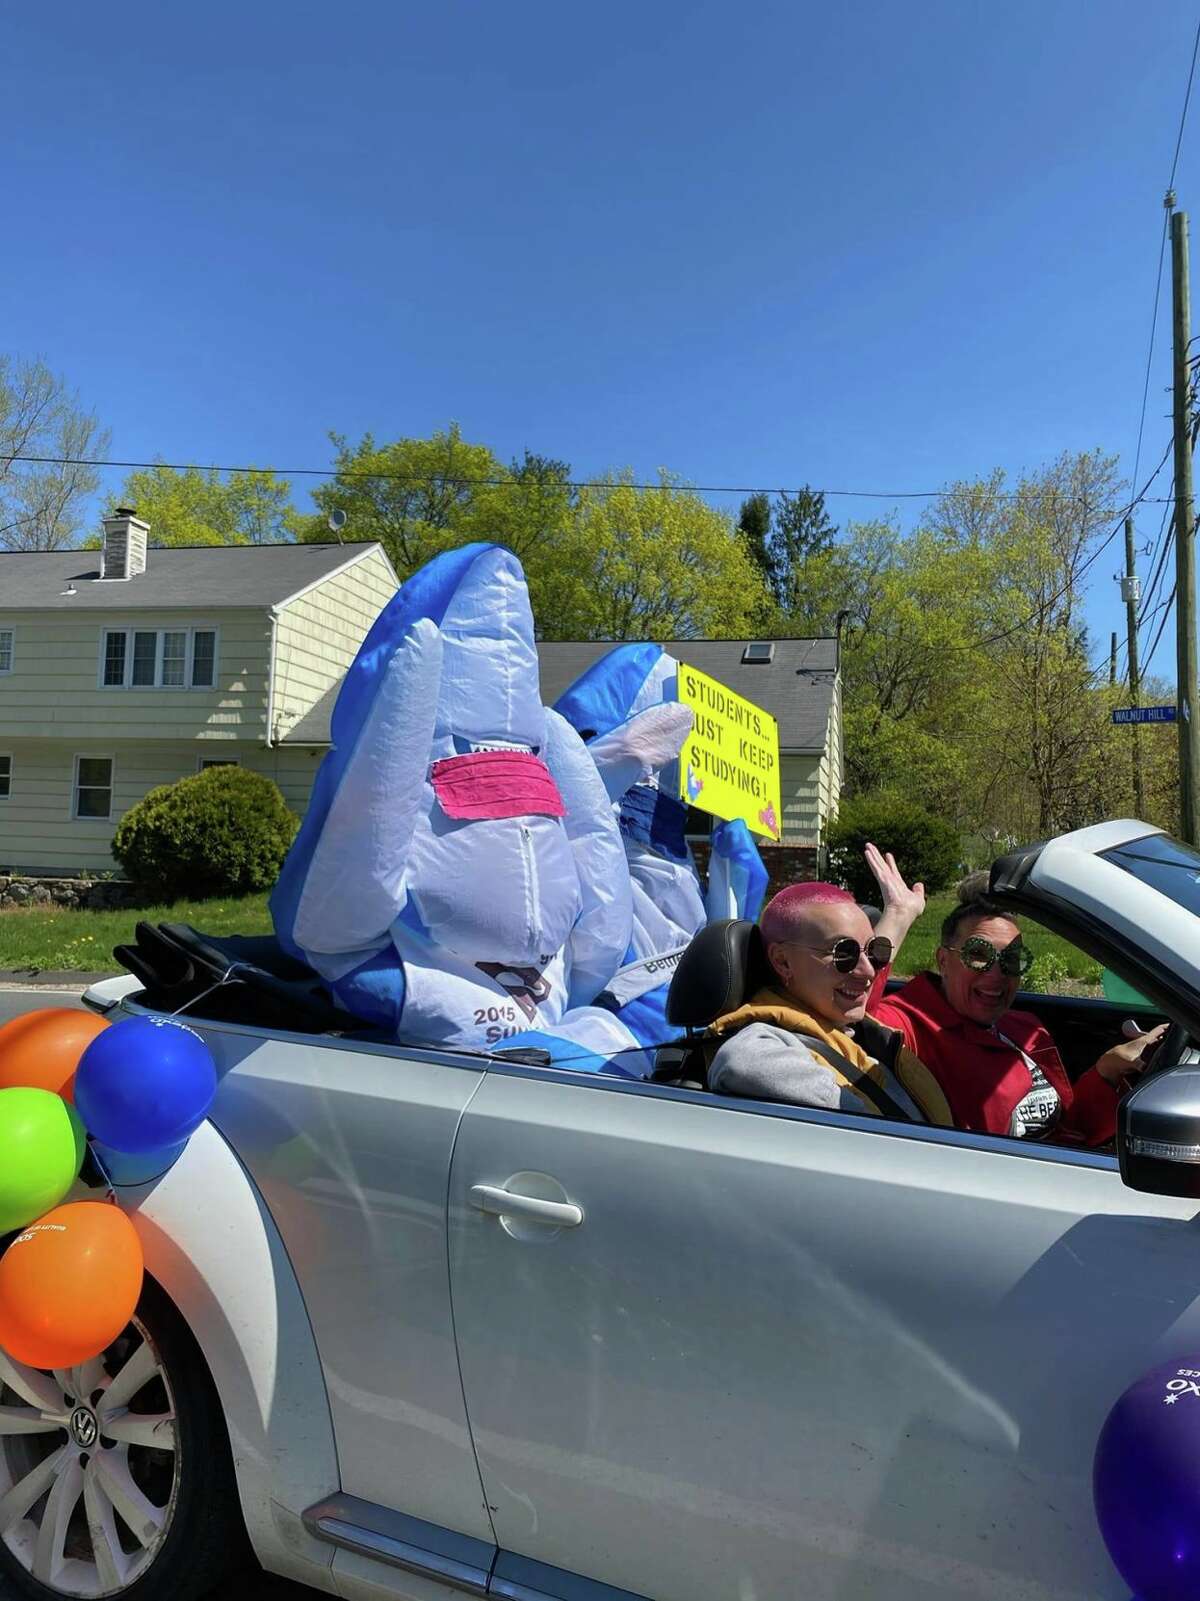 Amanda Riley, director of Bethel school system food services, drives her daughter Emie Riley and two Bethel sharks in a parade to celebrated Teacher Appreciation Day. About 180 staff members drove in multiple convoys across Bethel with school buses, police cars and fire trucks accompanying them. Tuesday, April 5, 2020, in Bethel, Conn.